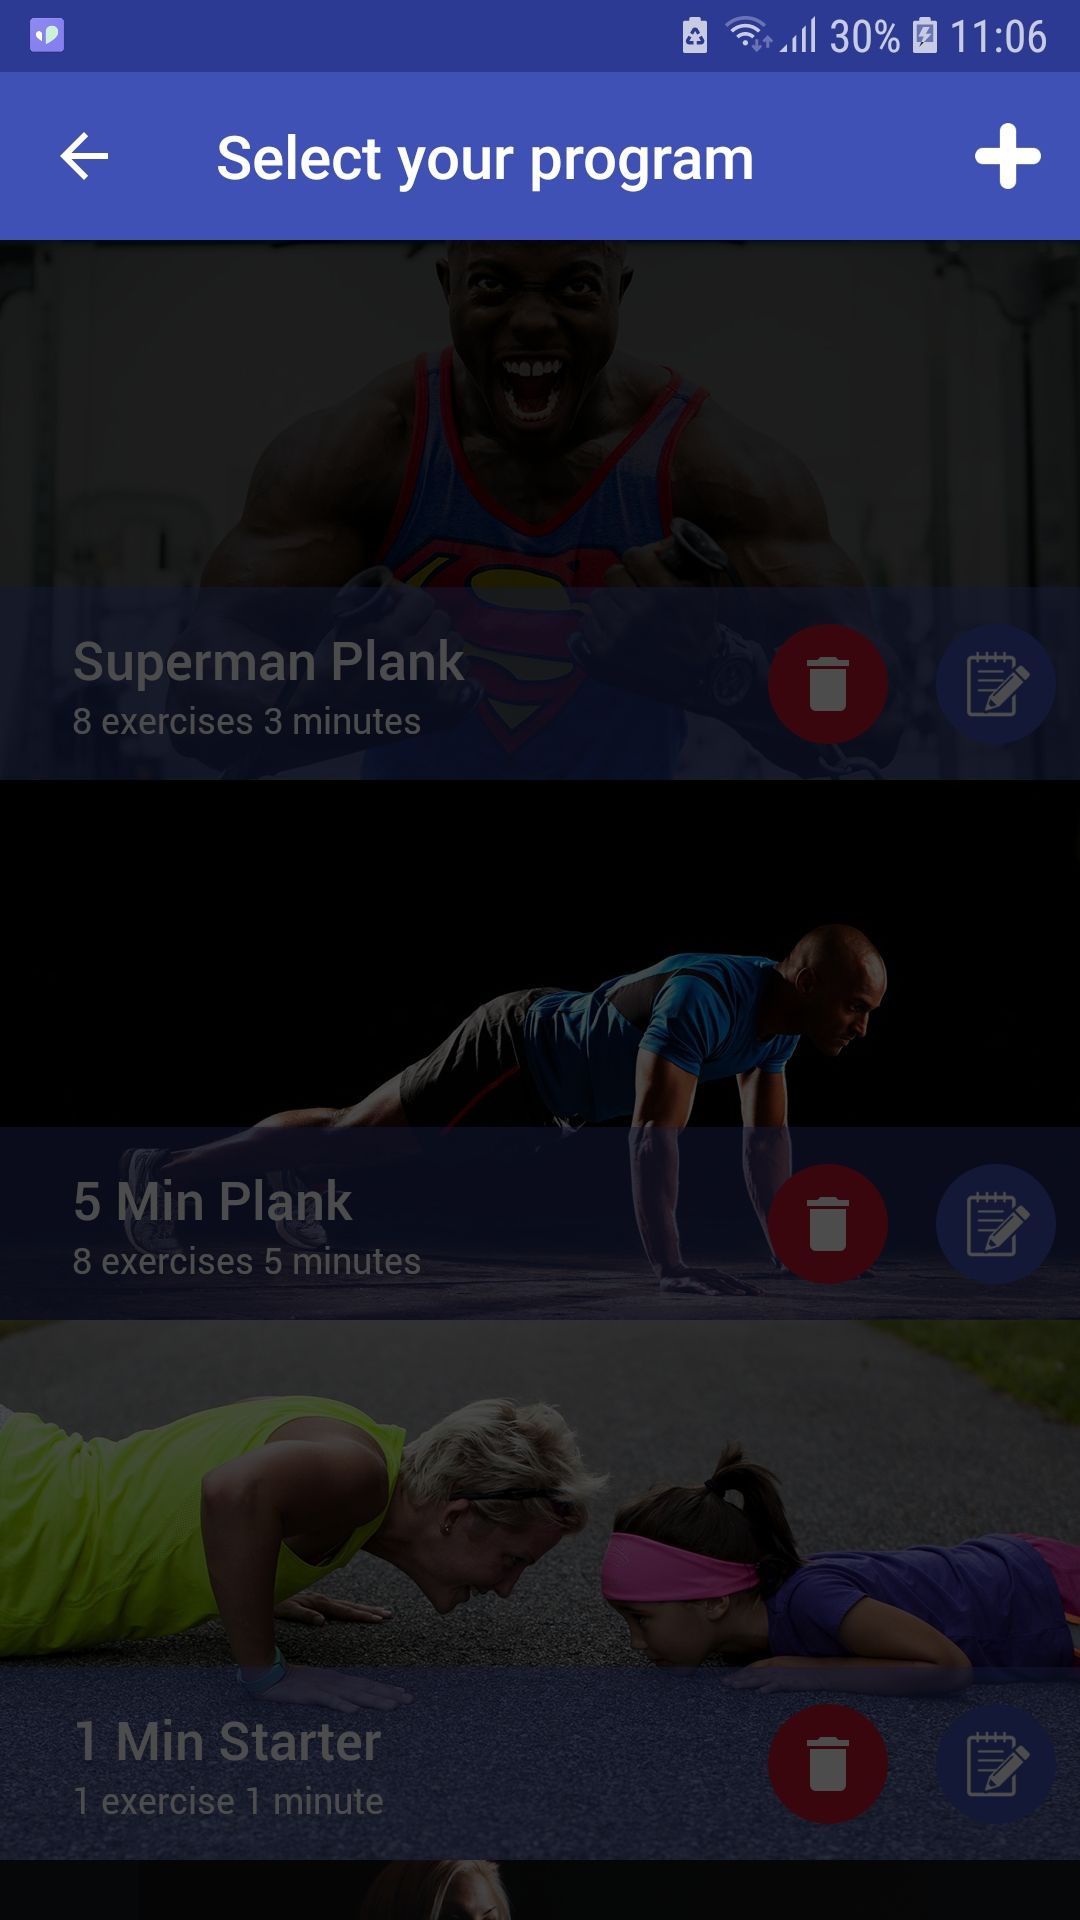 5 Minute Plank mobile exercise app 